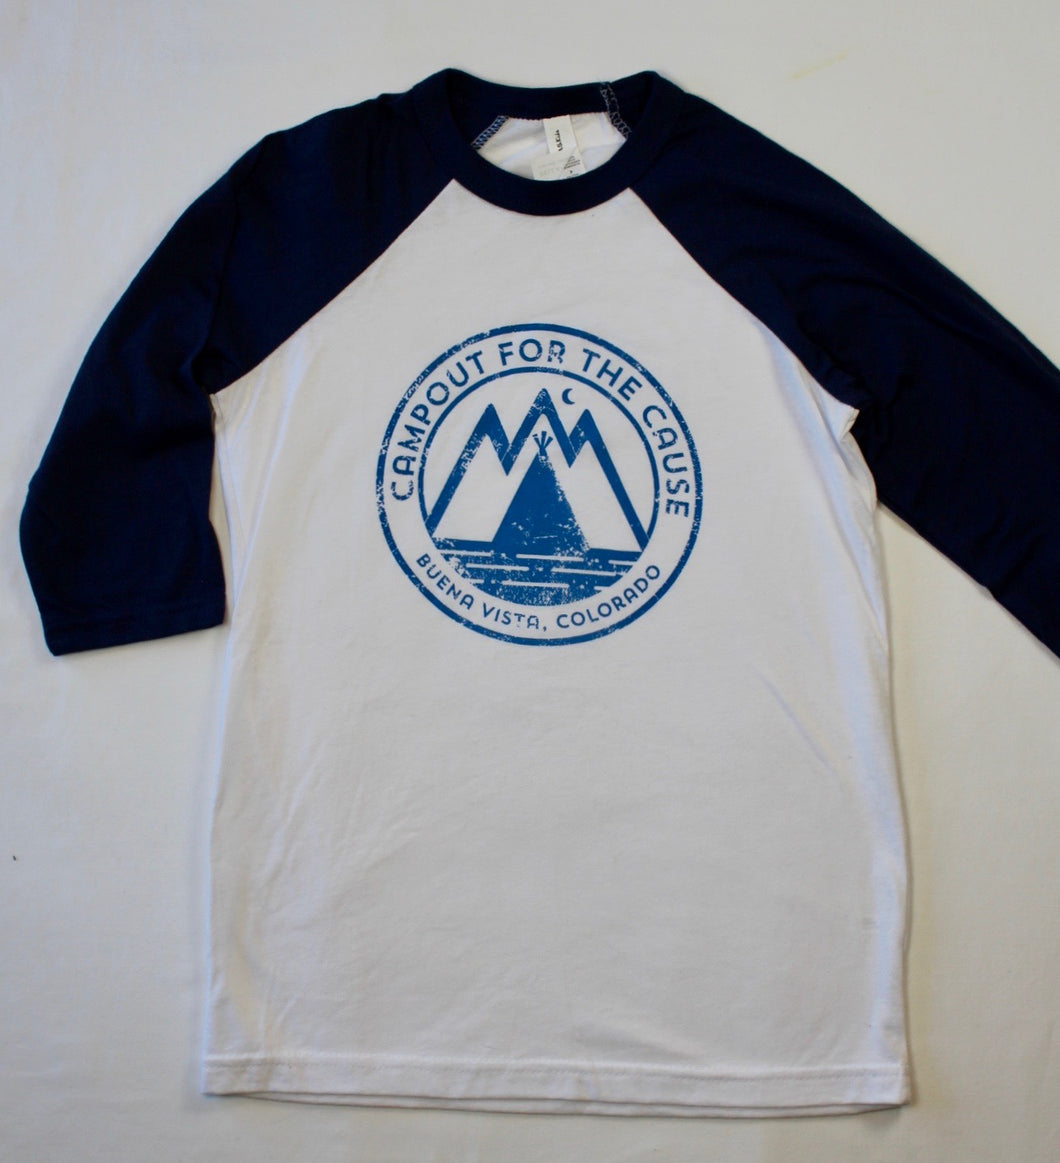 3/4 Sleeve Campout for the Cause - Youth T-Shirt